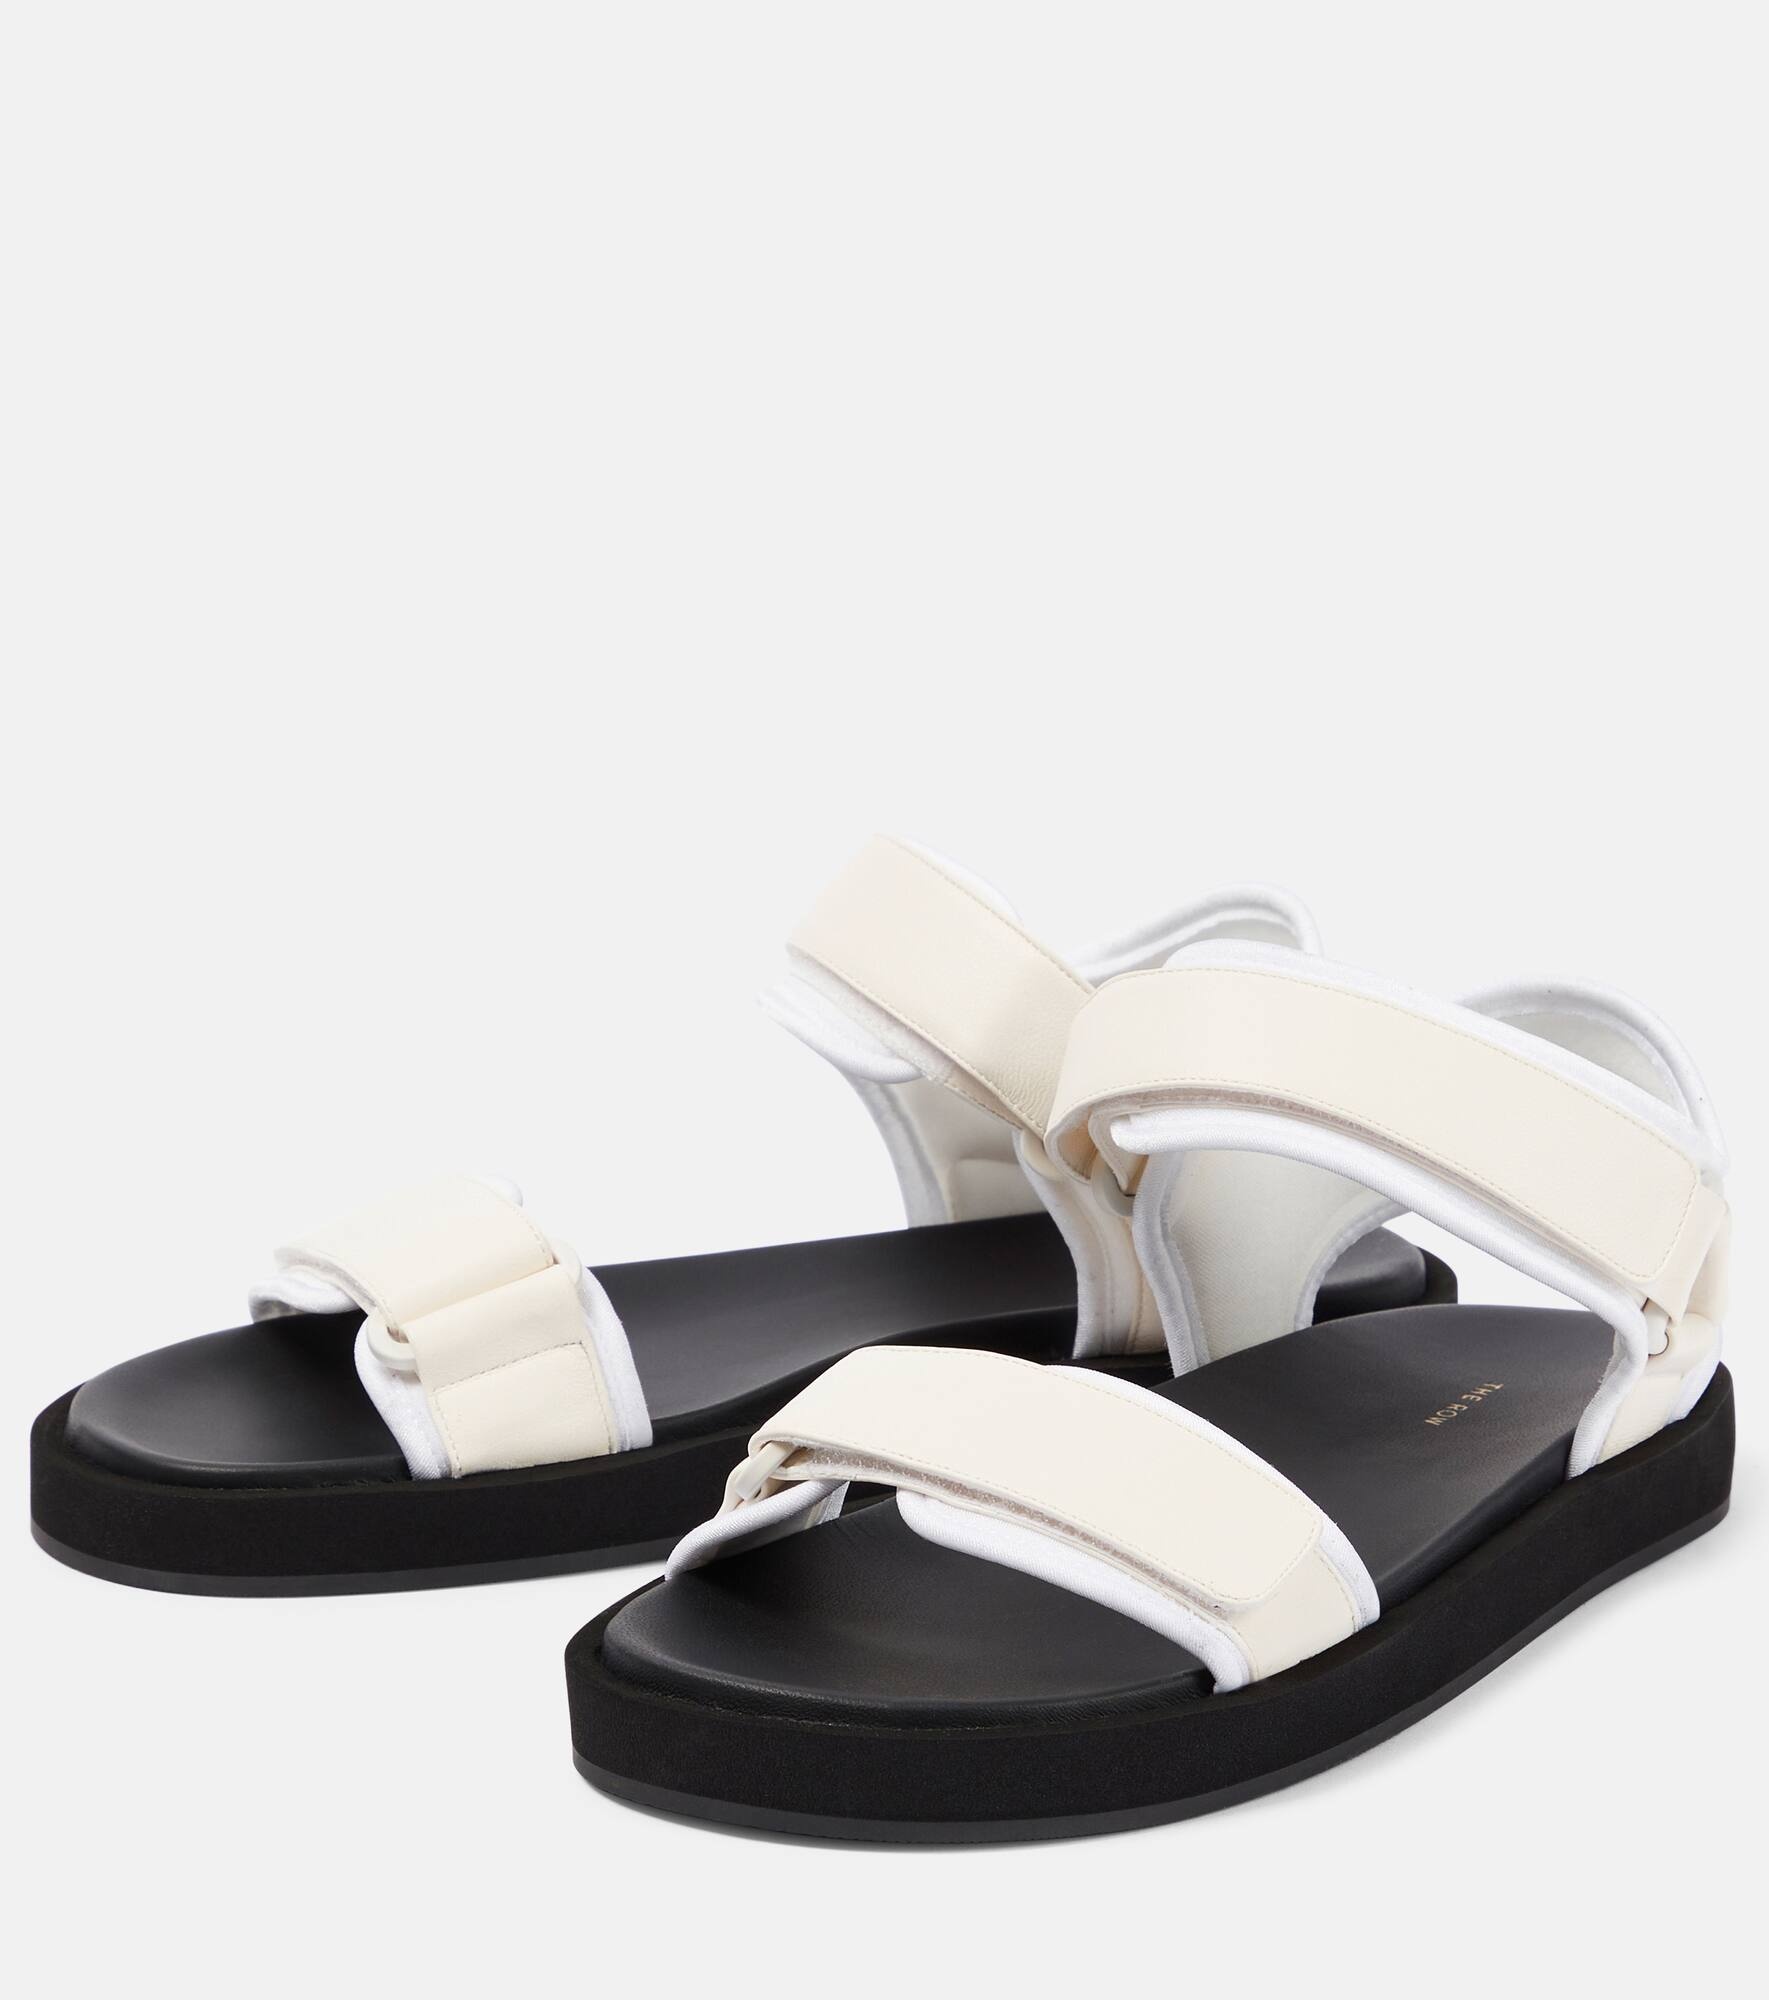 Hook and Loop leather sandals - 5